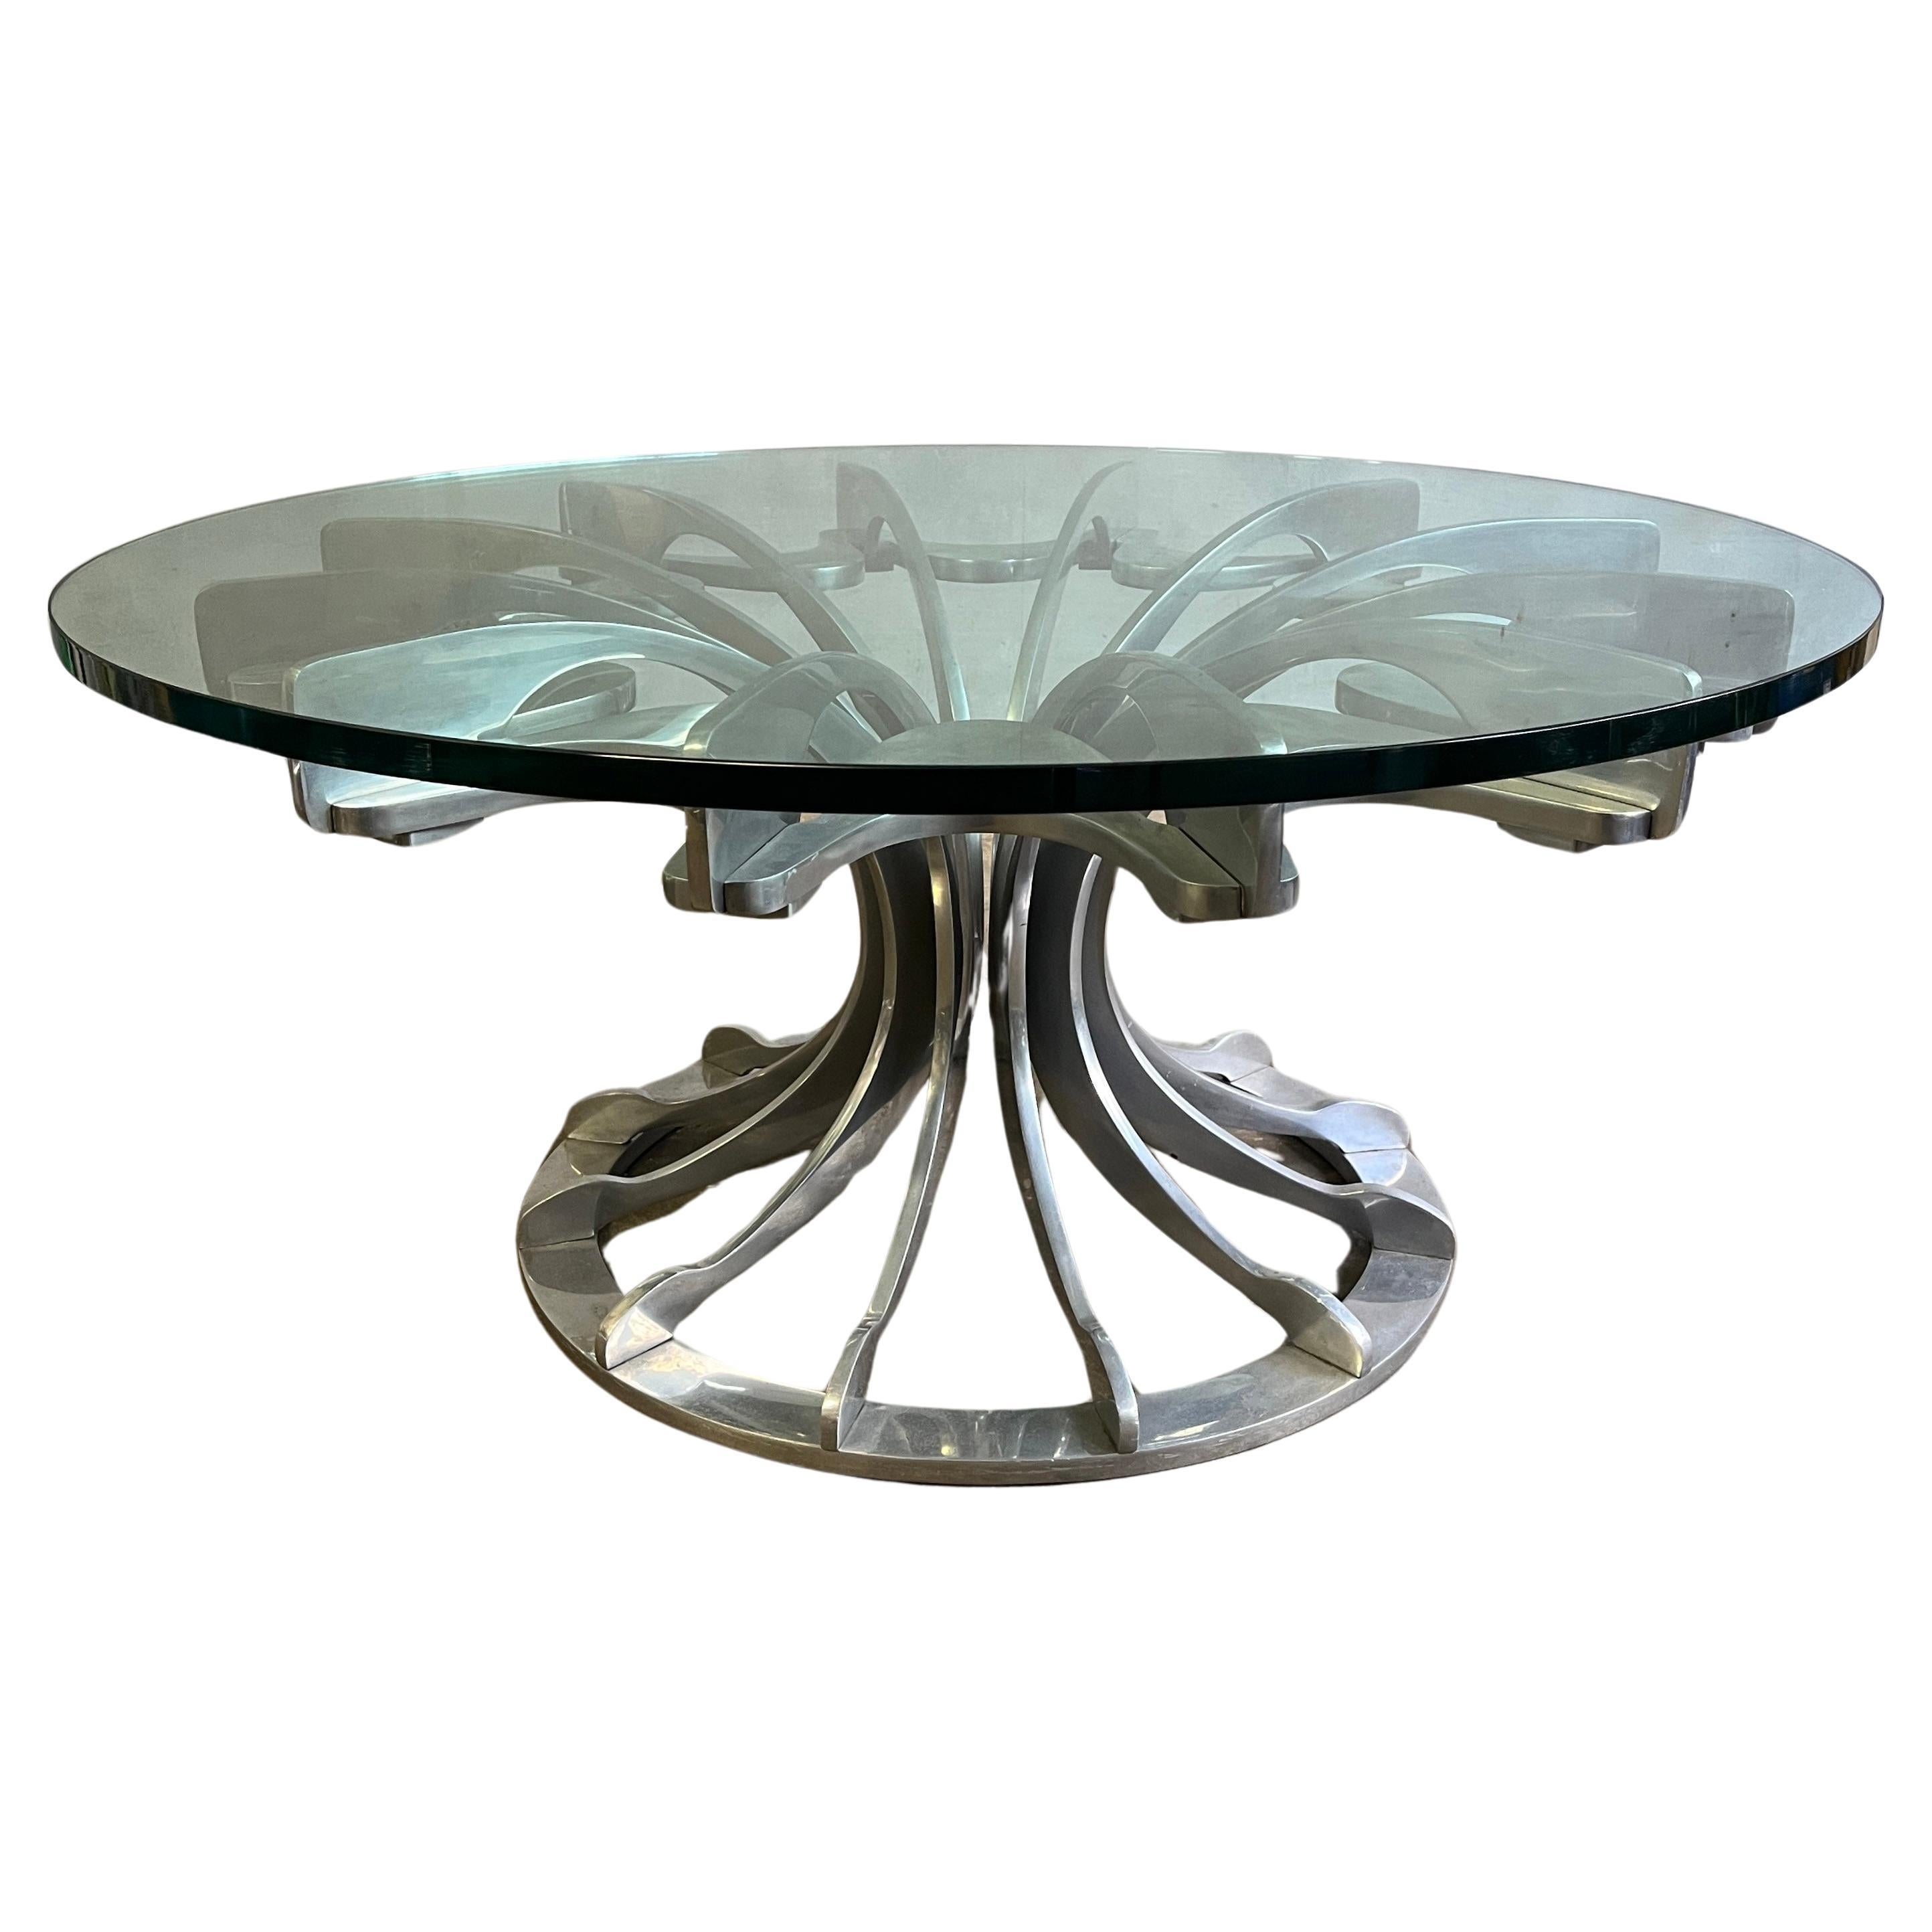 Superbly Designed and Crafted Cast Aluminum Coffee Table For Sale